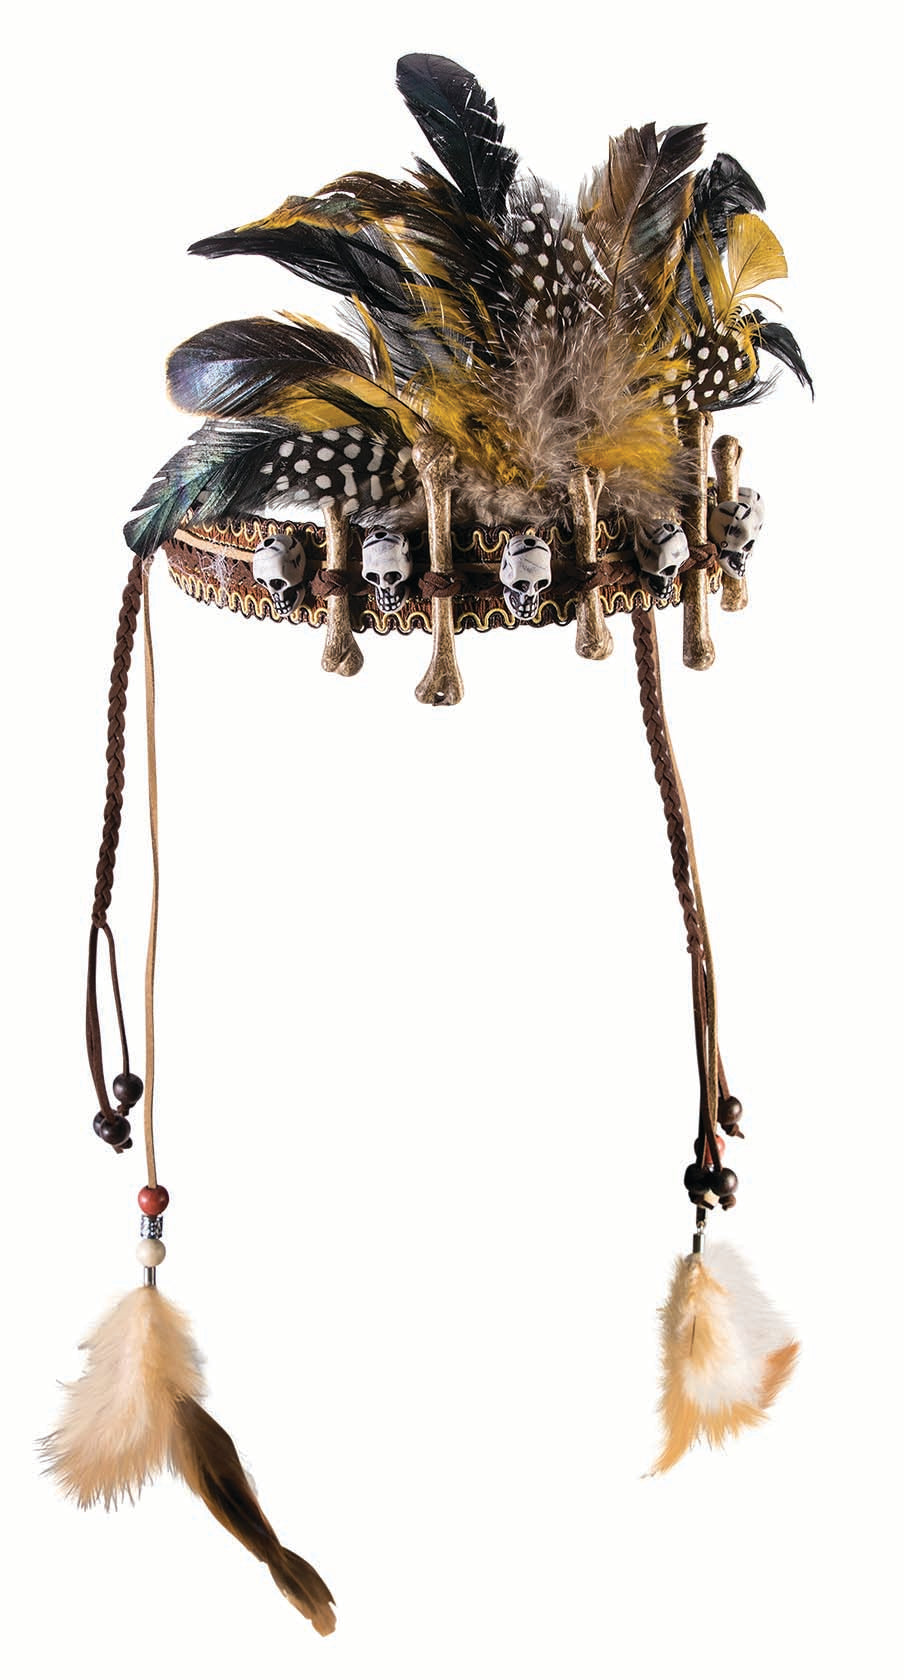 Witch Doctor Headpiece - Voodoo - Bones Feathers - Costume Accessory - Adult